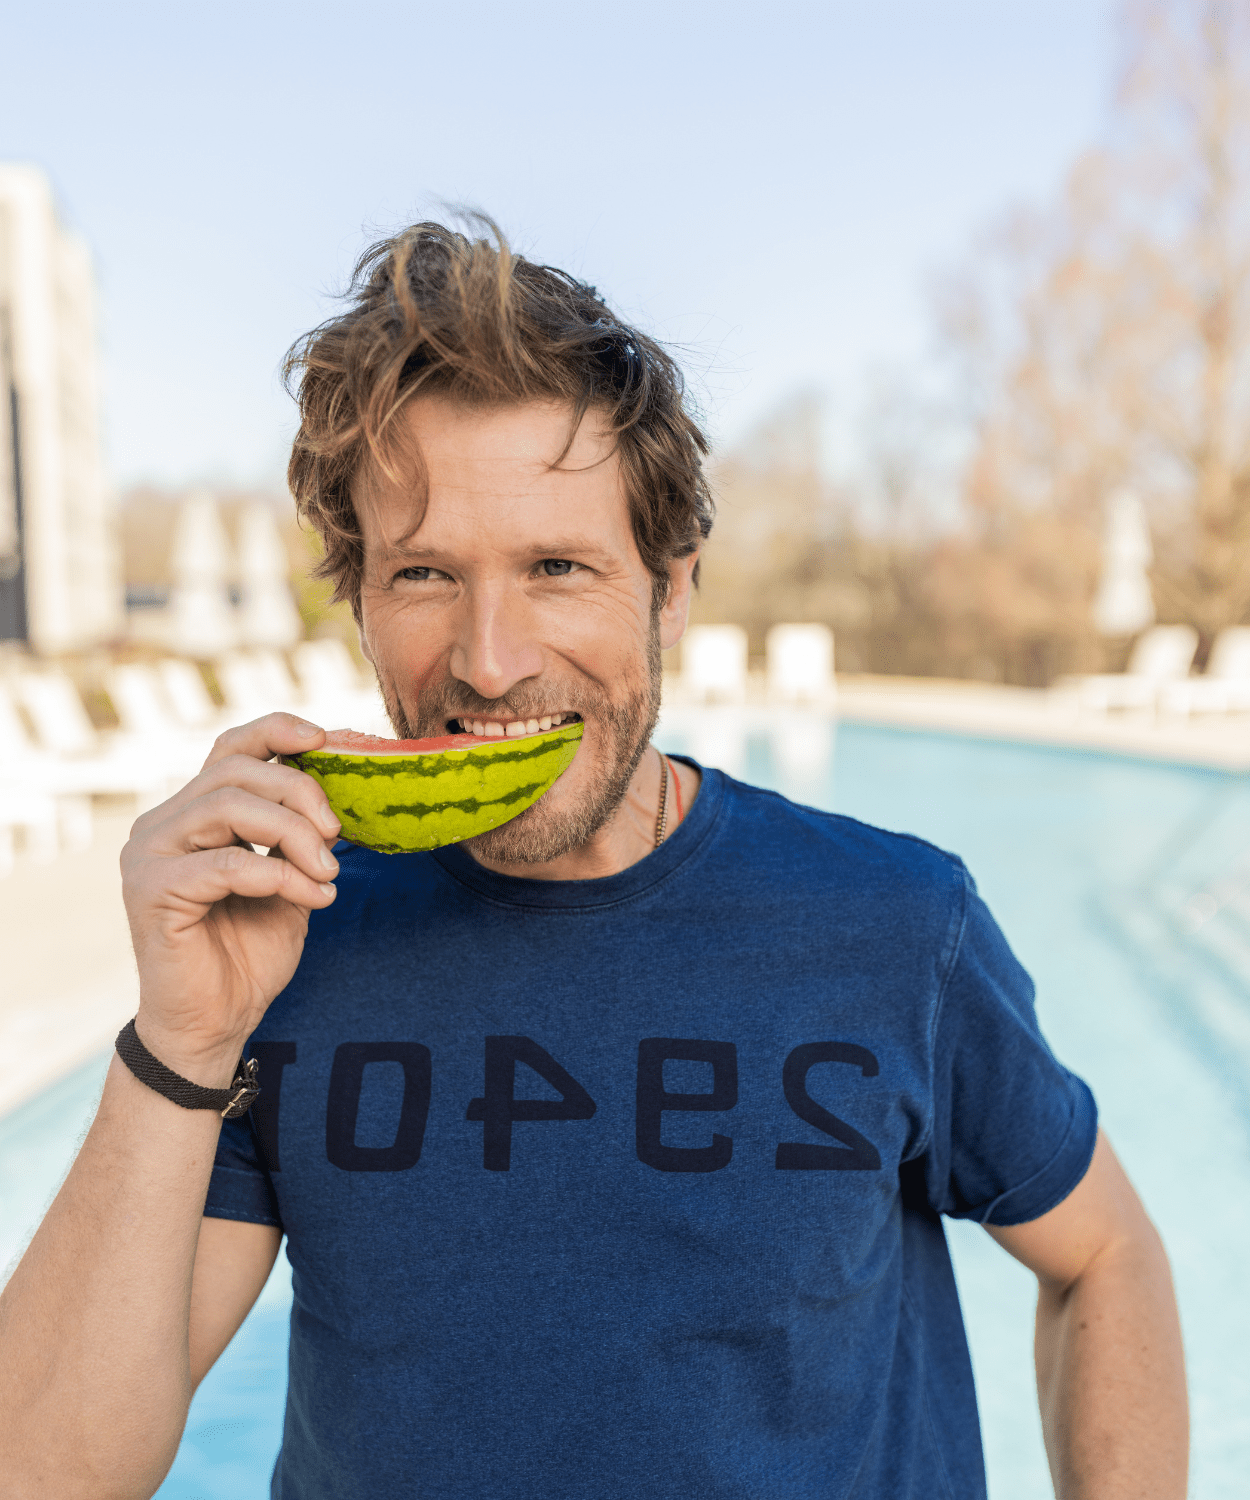 man eating a melon in an oobe brand graphic tee